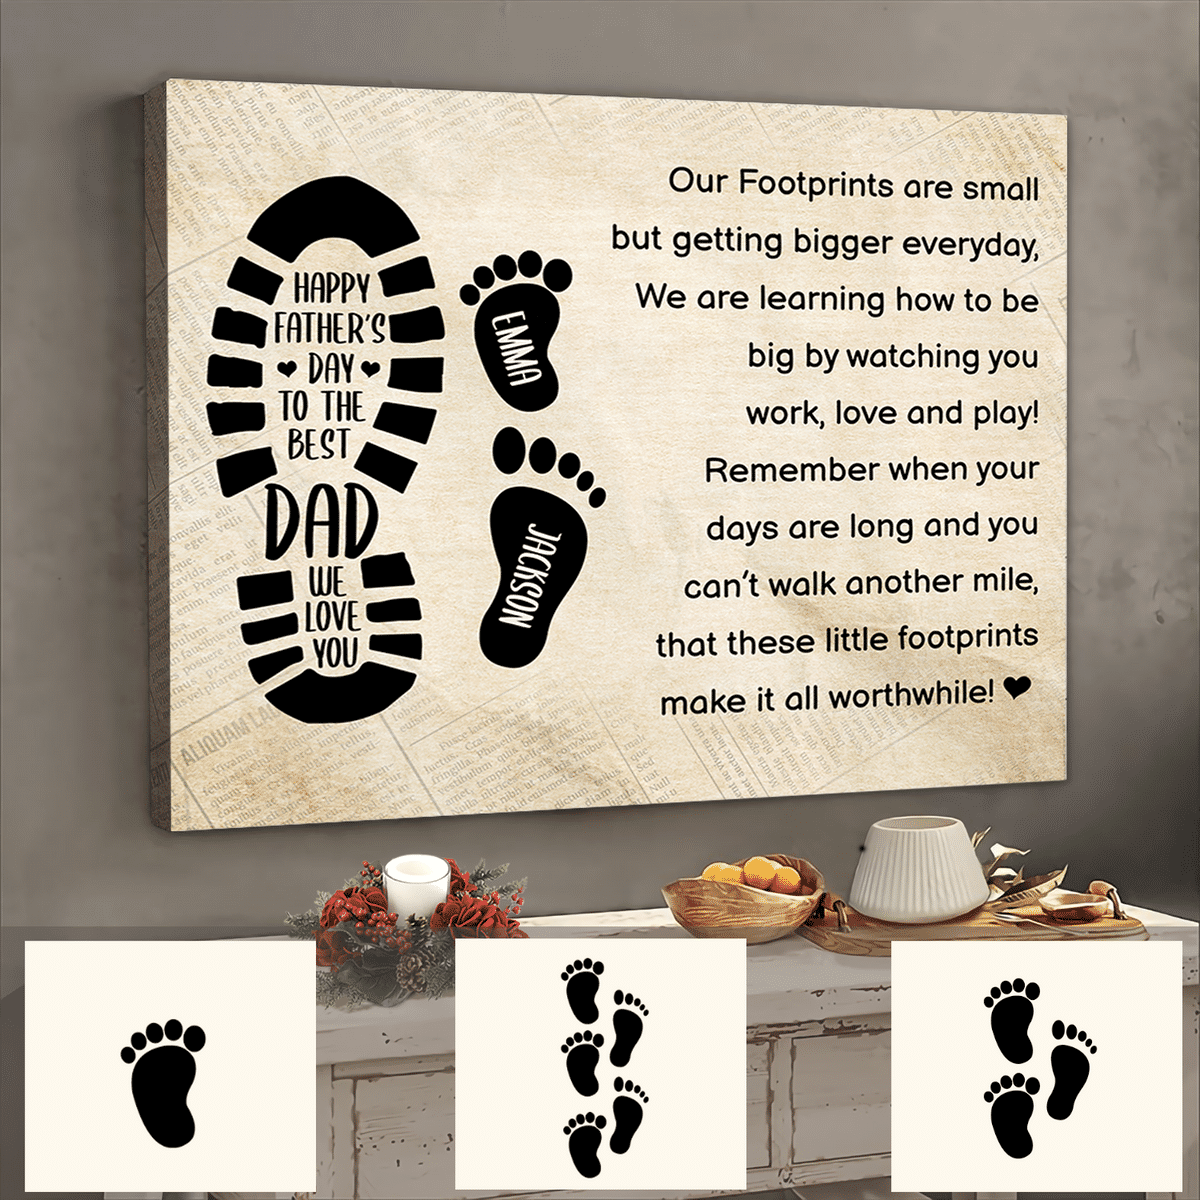 Father's Day Gift - Father & Daughters/Sons - Our Footprints are small but getting bigger everyday - Personalized Poster